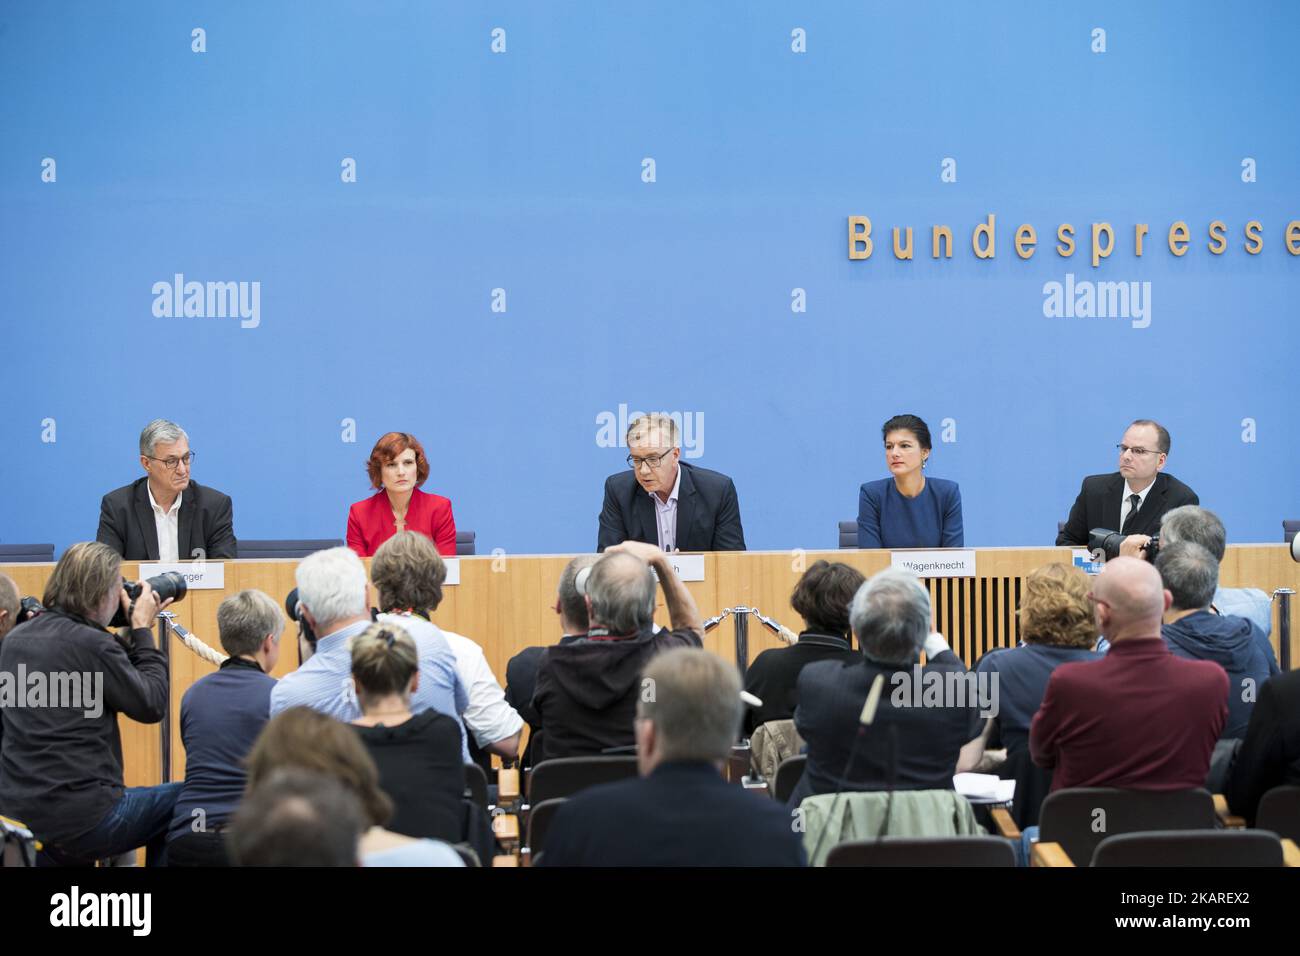 Top candidates of Die Linke (The Left) party Sahra Wagenknecht (2R) and Dietmar Bartsch (C) and Co-Leaders Katja Kipping (2L) and Bernd Riexinger (L) are pictured during a press conference in Berlin, Germany on September 25, 2017. (Photo by Emmanuele Contini/NurPhoto) Stock Photo